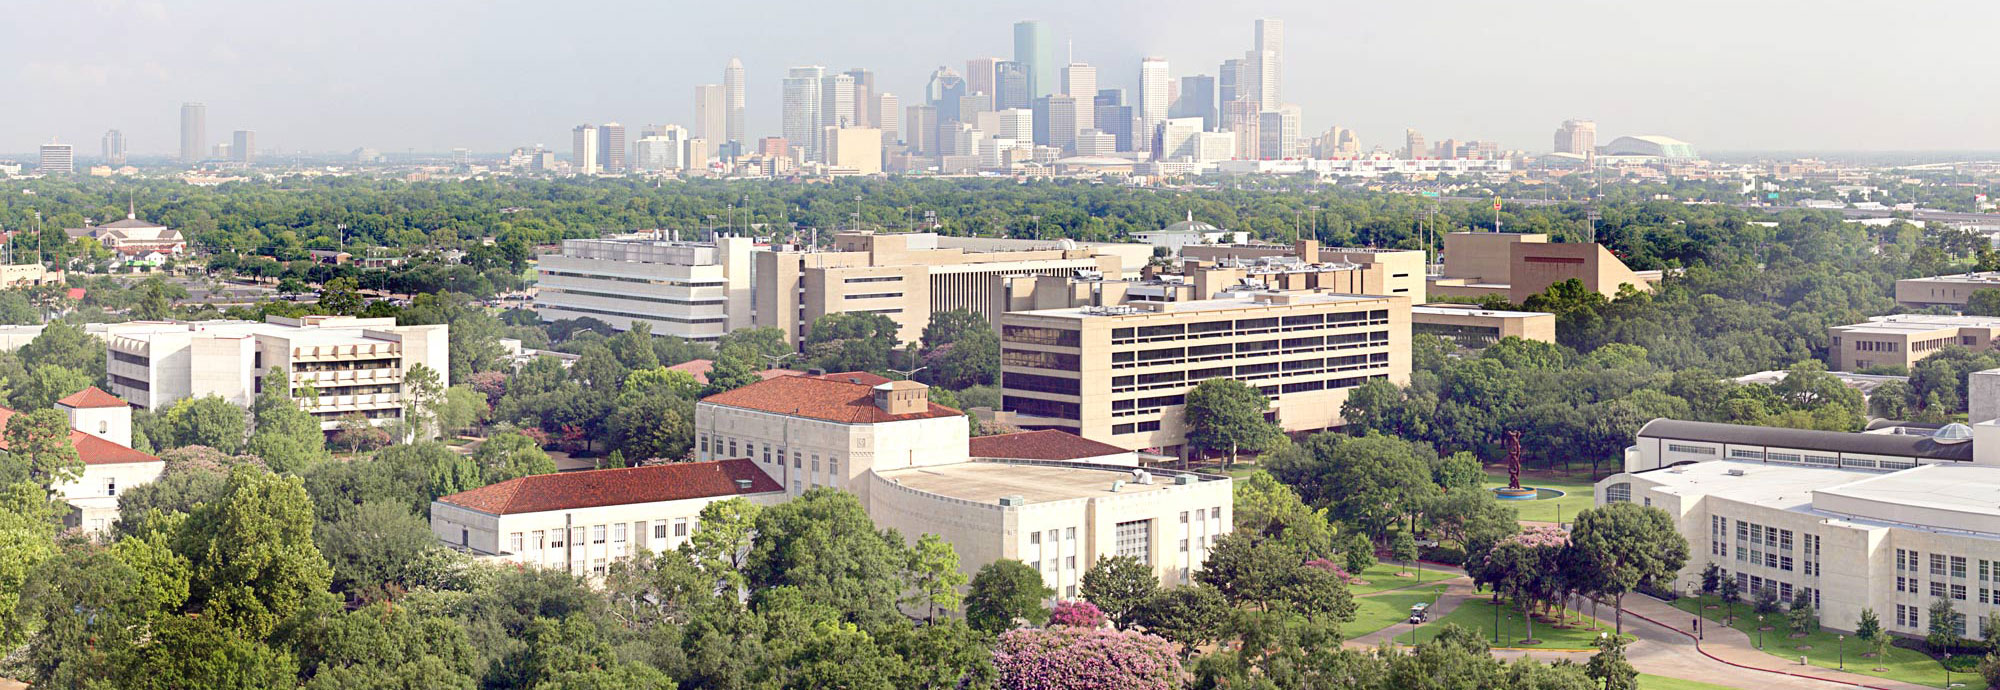 Aerial view of UH Campus with Houston Skyline